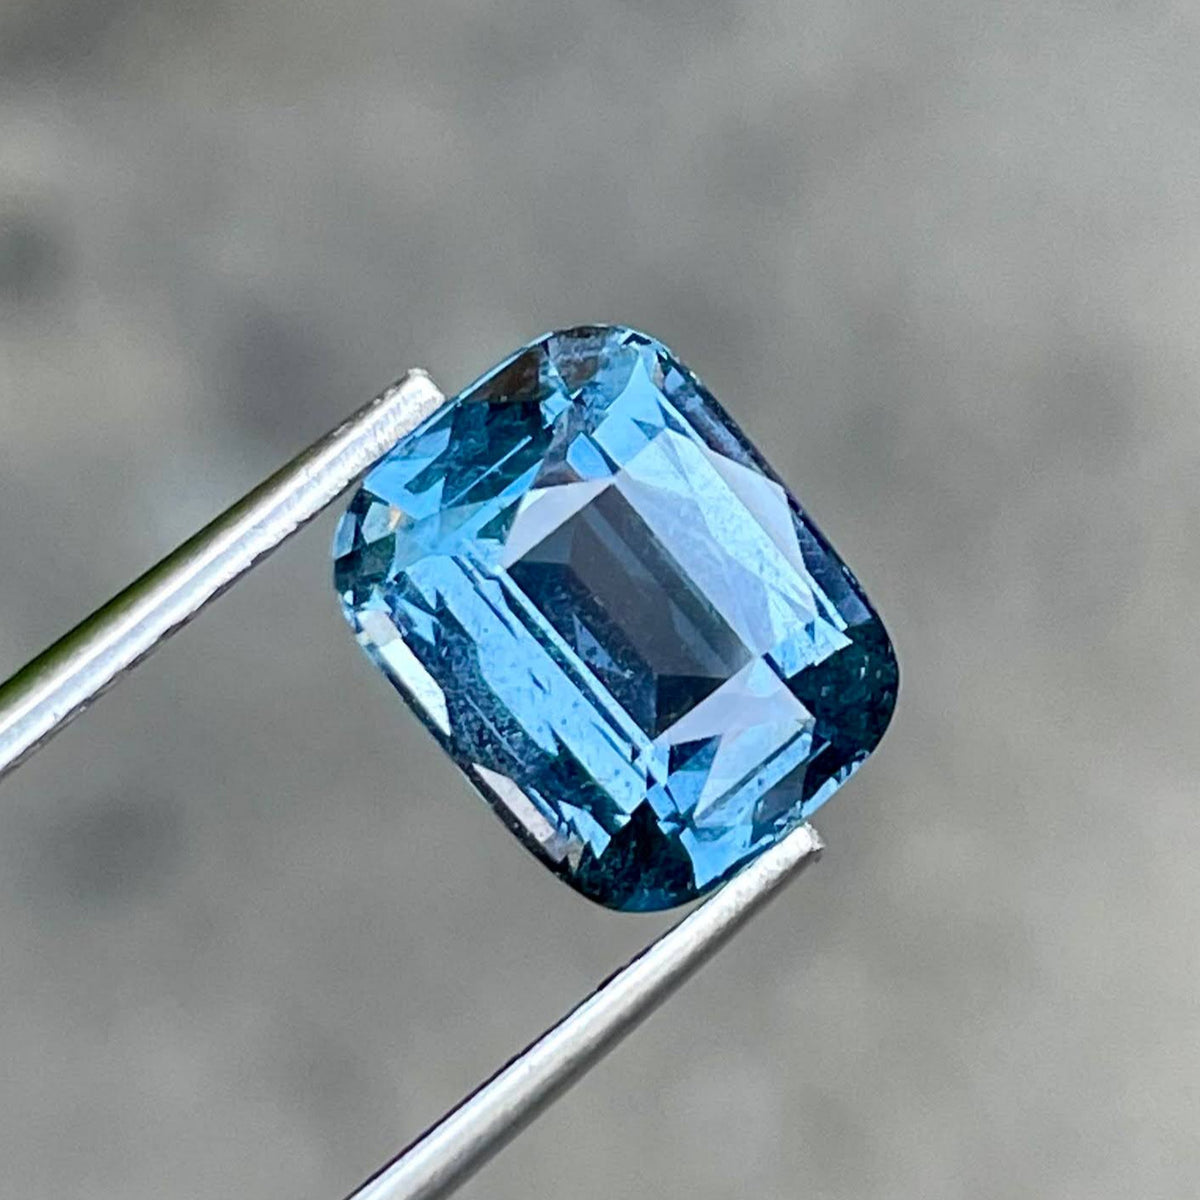 2.55 Carats Light Blue Spinel Stone